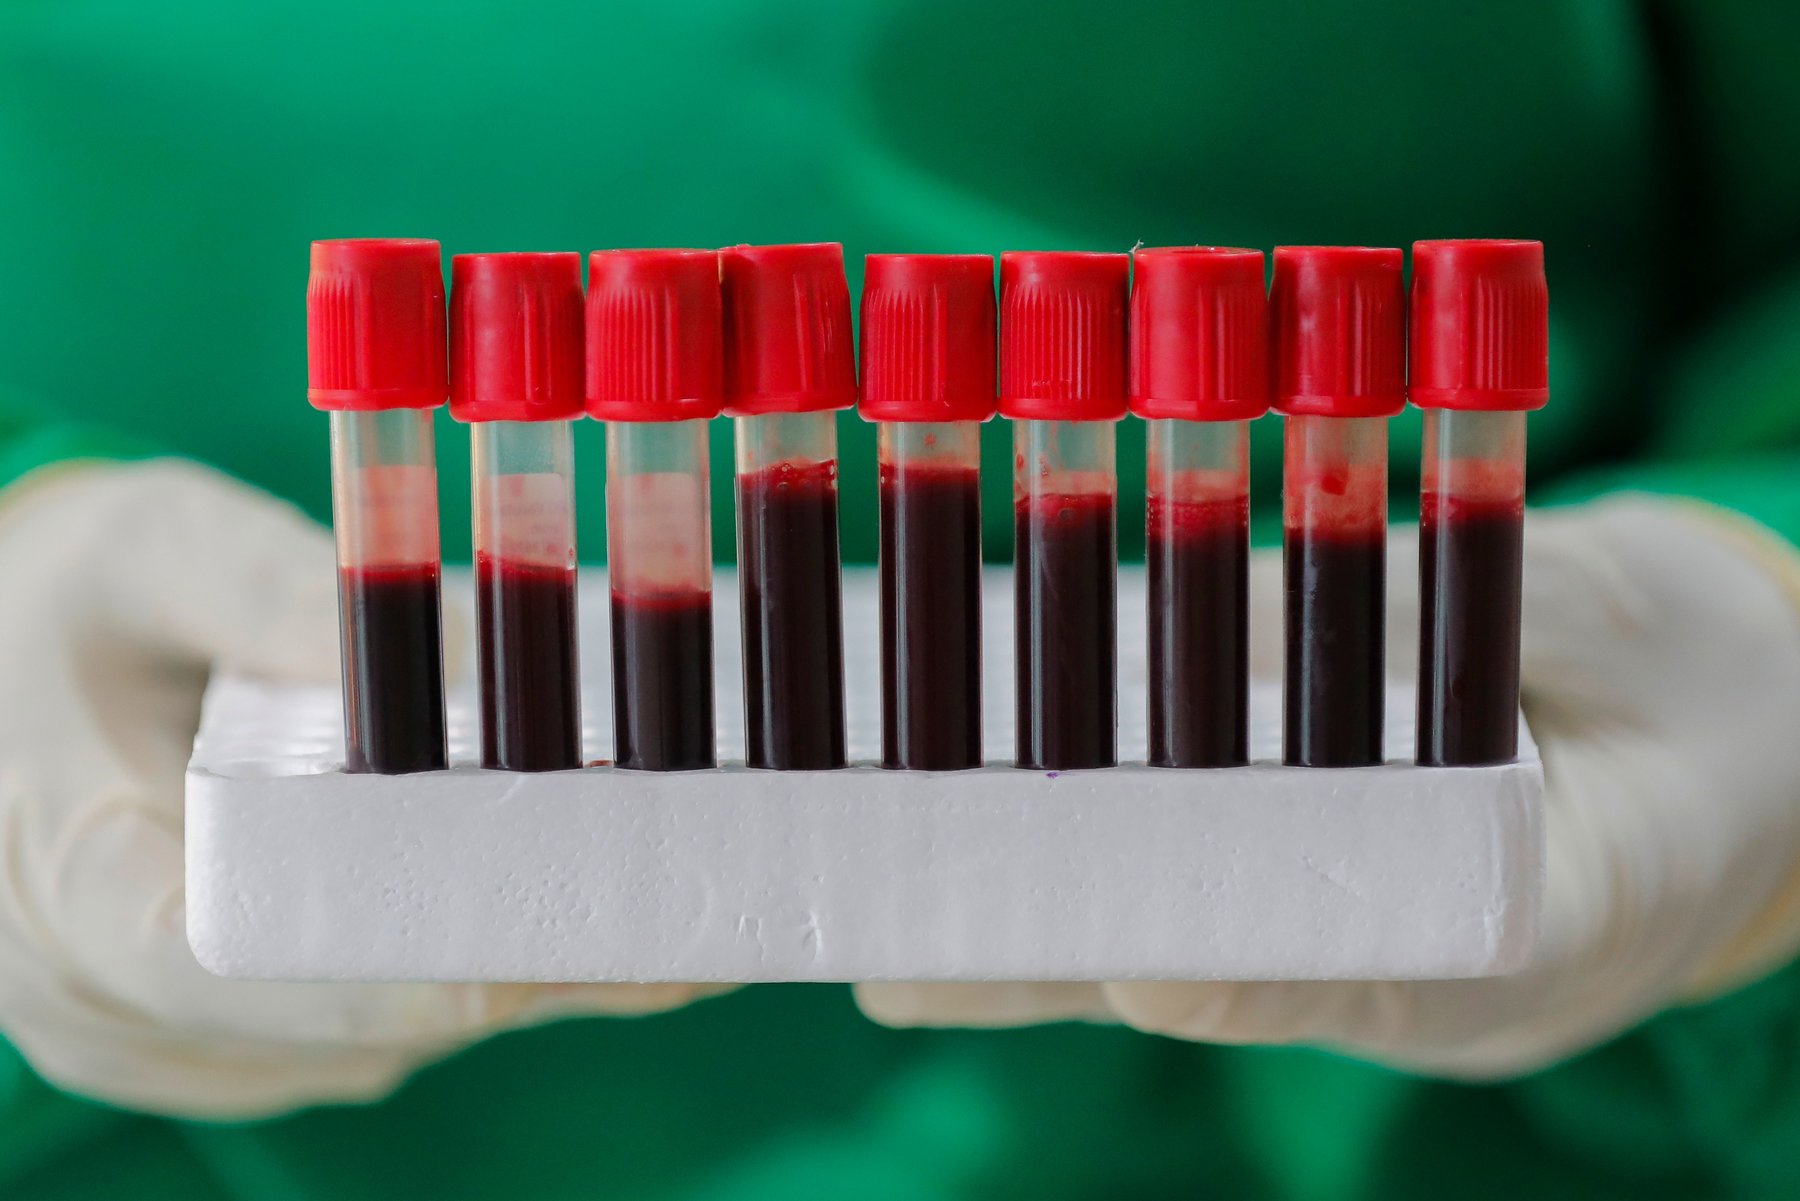 Blood Type A is Common in COVID-19 Cases, Study Suggests